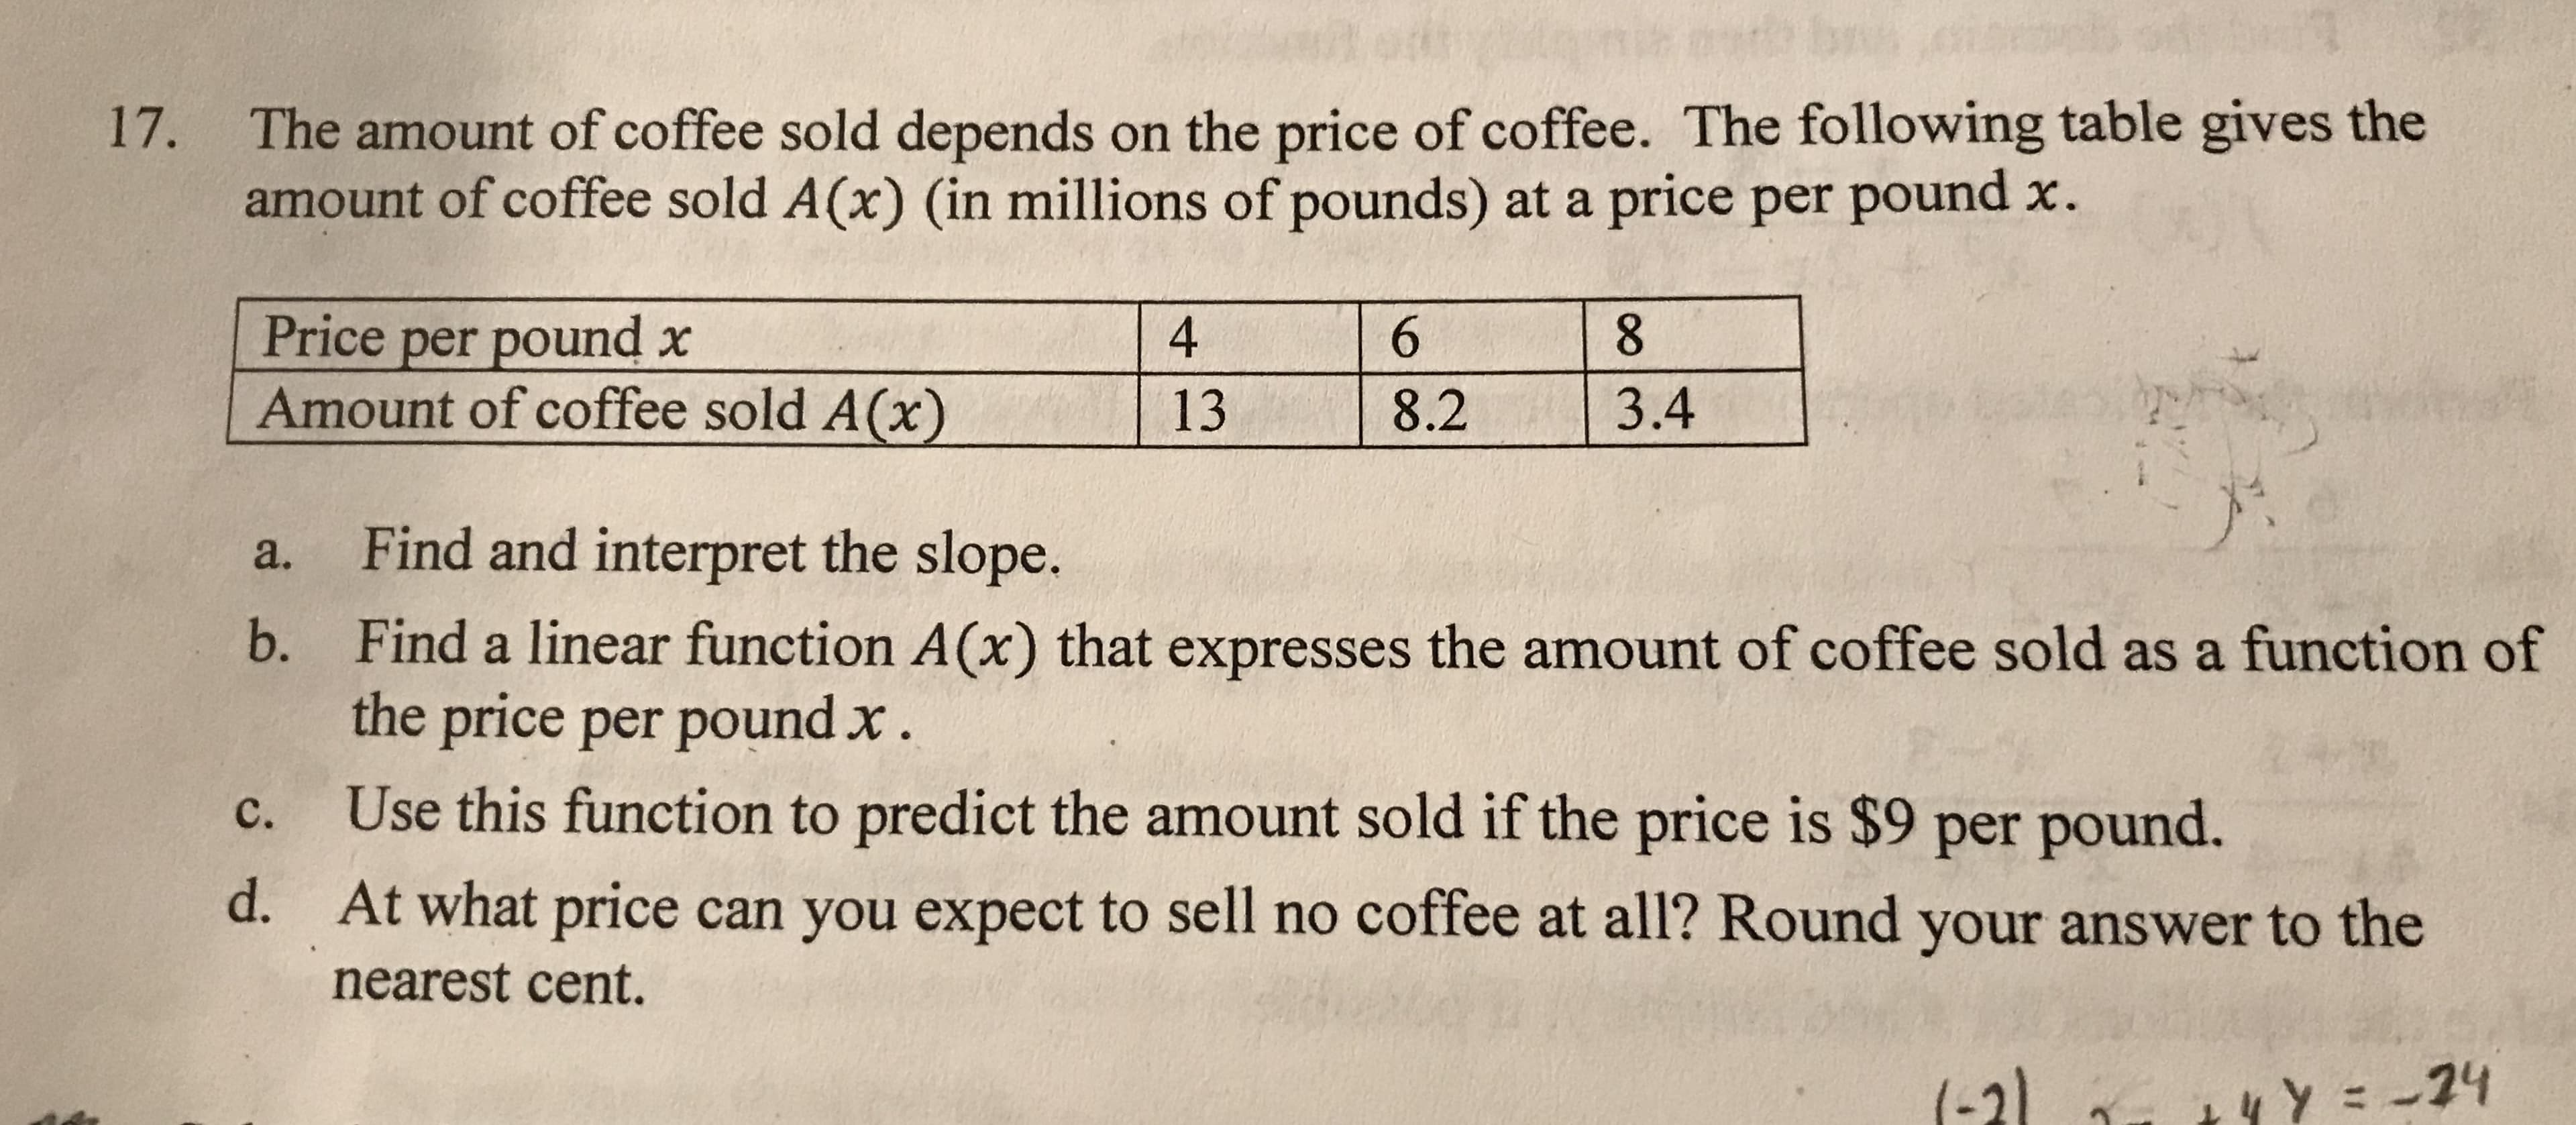 The amount of coffee sold depends on the price of coffee. The following table gives the
amount of coffee sold A(x) (in millions of pounds) at a price per pound x.
17.
Price per pound x
Amount of coffee sold A(x)
8.
4
6.
3.4
13
8.2
Find and interpret the slope.
a.
Find a linear function A(x) that expresses the amount of coffee sold as a function of
the price per pound x.
b.
Use this function to predict the amount sold if the price is $9 per pound.
C.
d.
At what price can you expect to sell no coffee at all? Round your answer to the
nearest cent.
(-21 - 44 Y = -74
